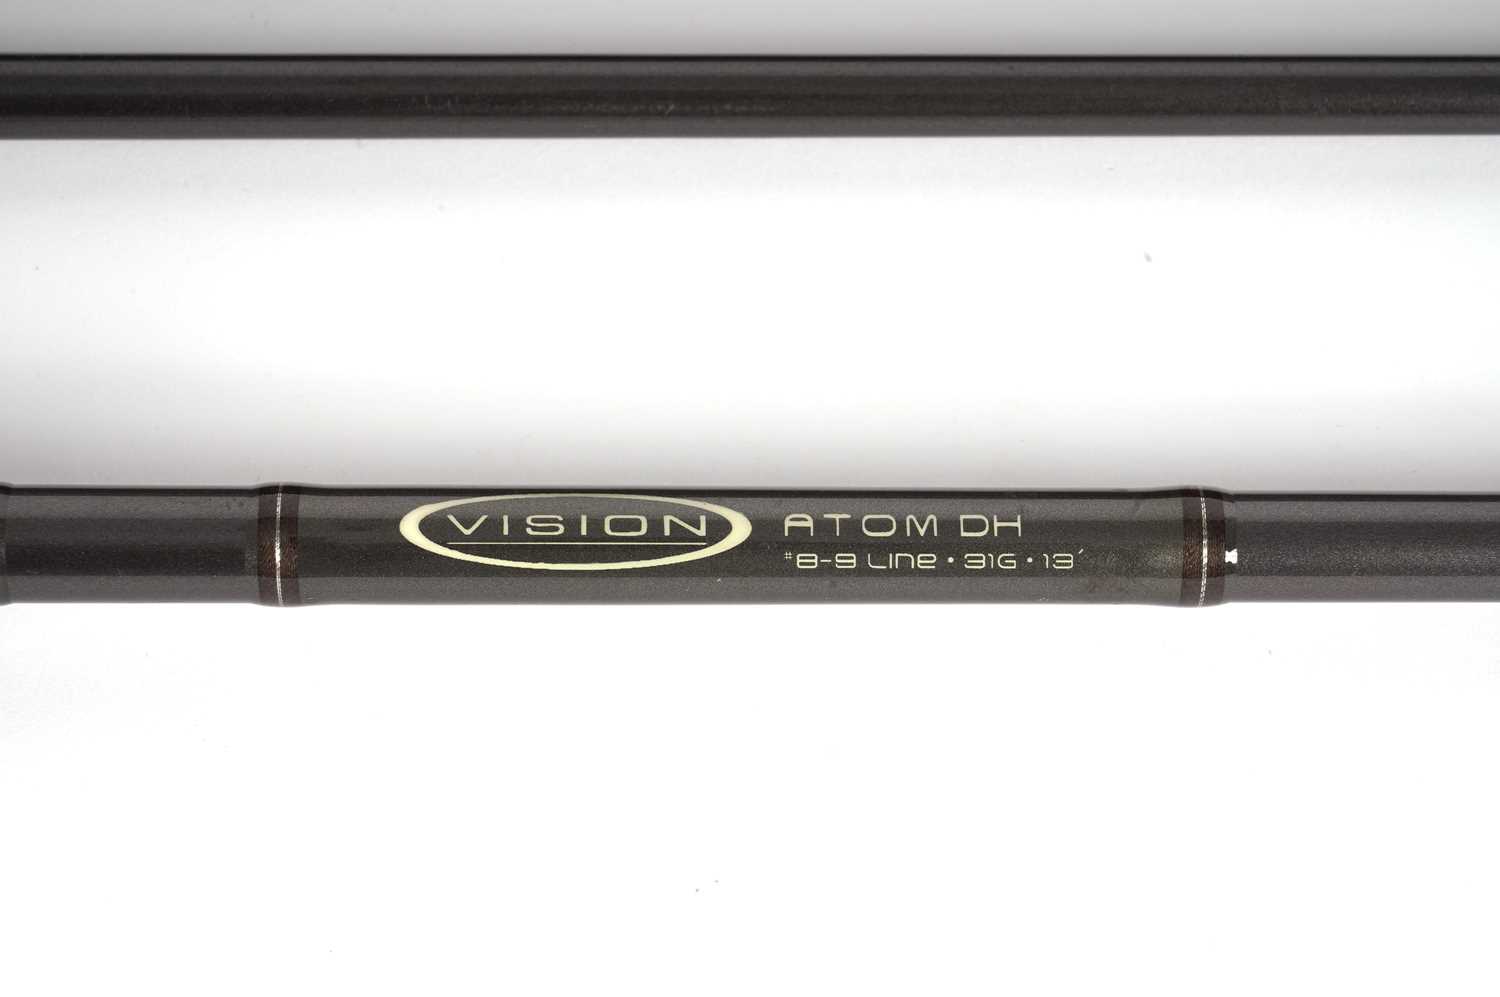 A Vision Atom DH 8-9’ line fishing rod - Image 2 of 4